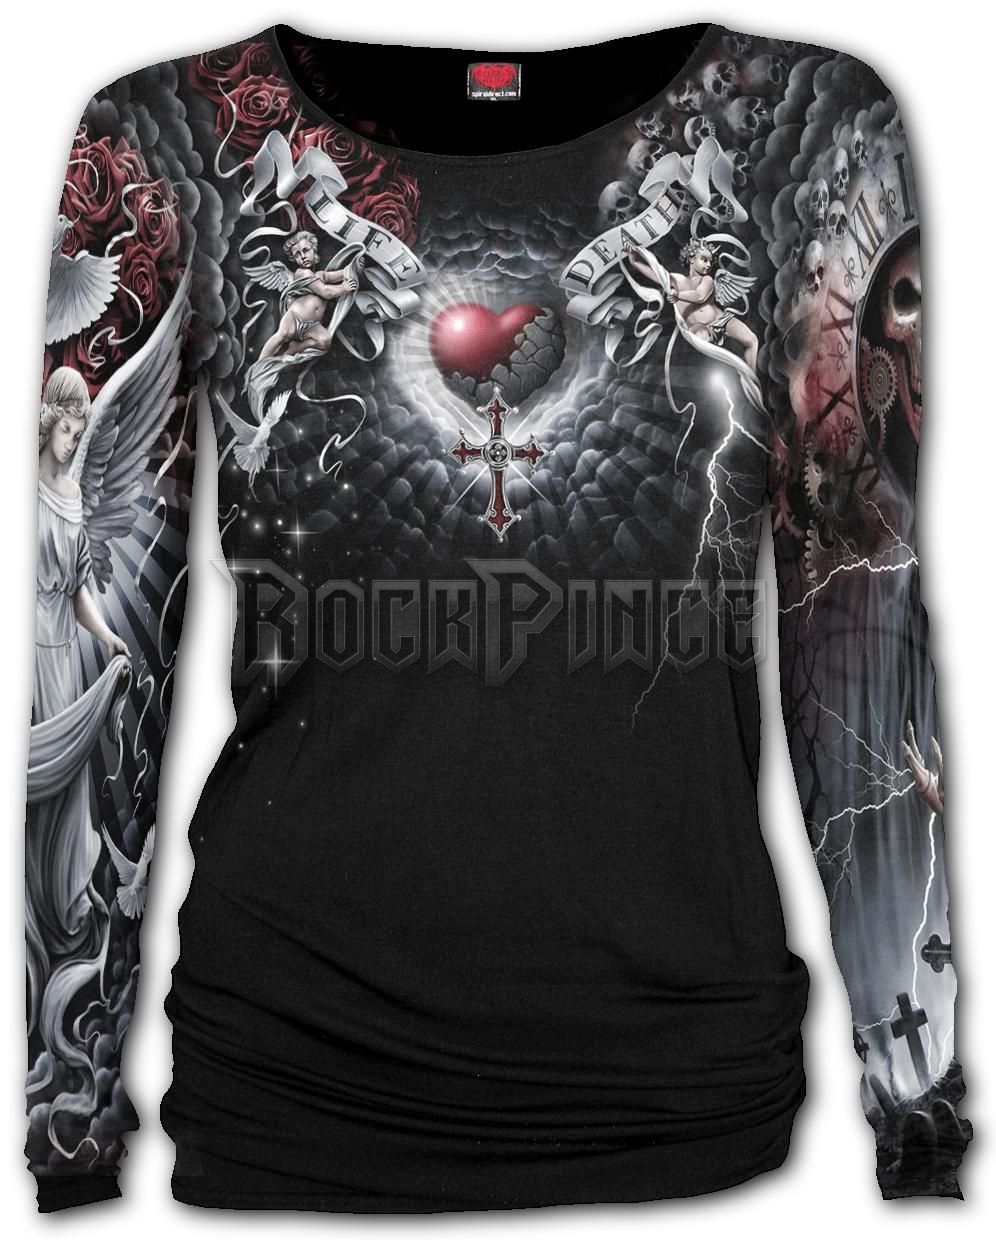 LIFE AND DEATH CROSS - Allover Baggy Top Black - W032F455